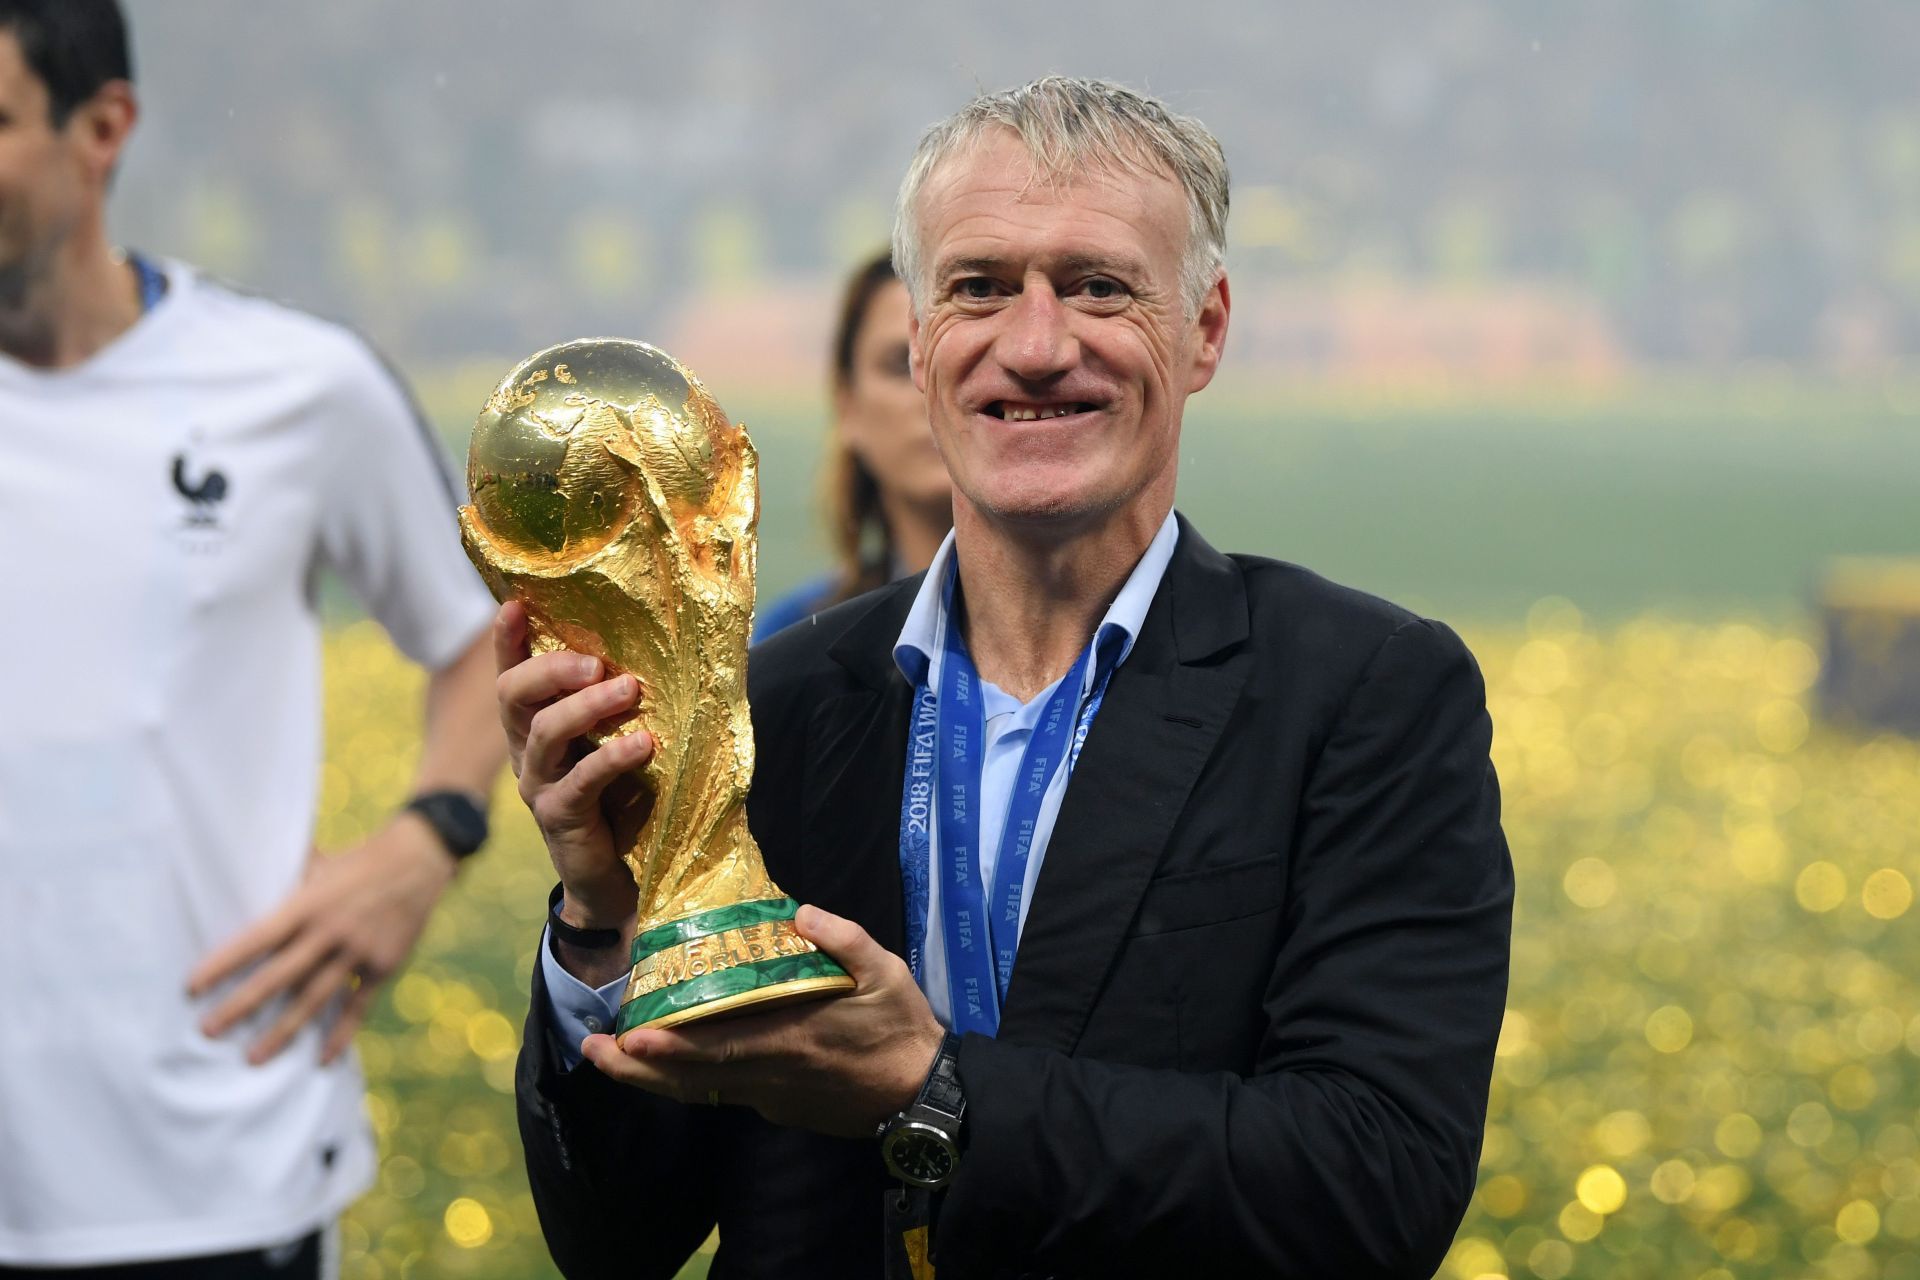 Didier Deschamps won the FIFA World Cup as both player and manager.